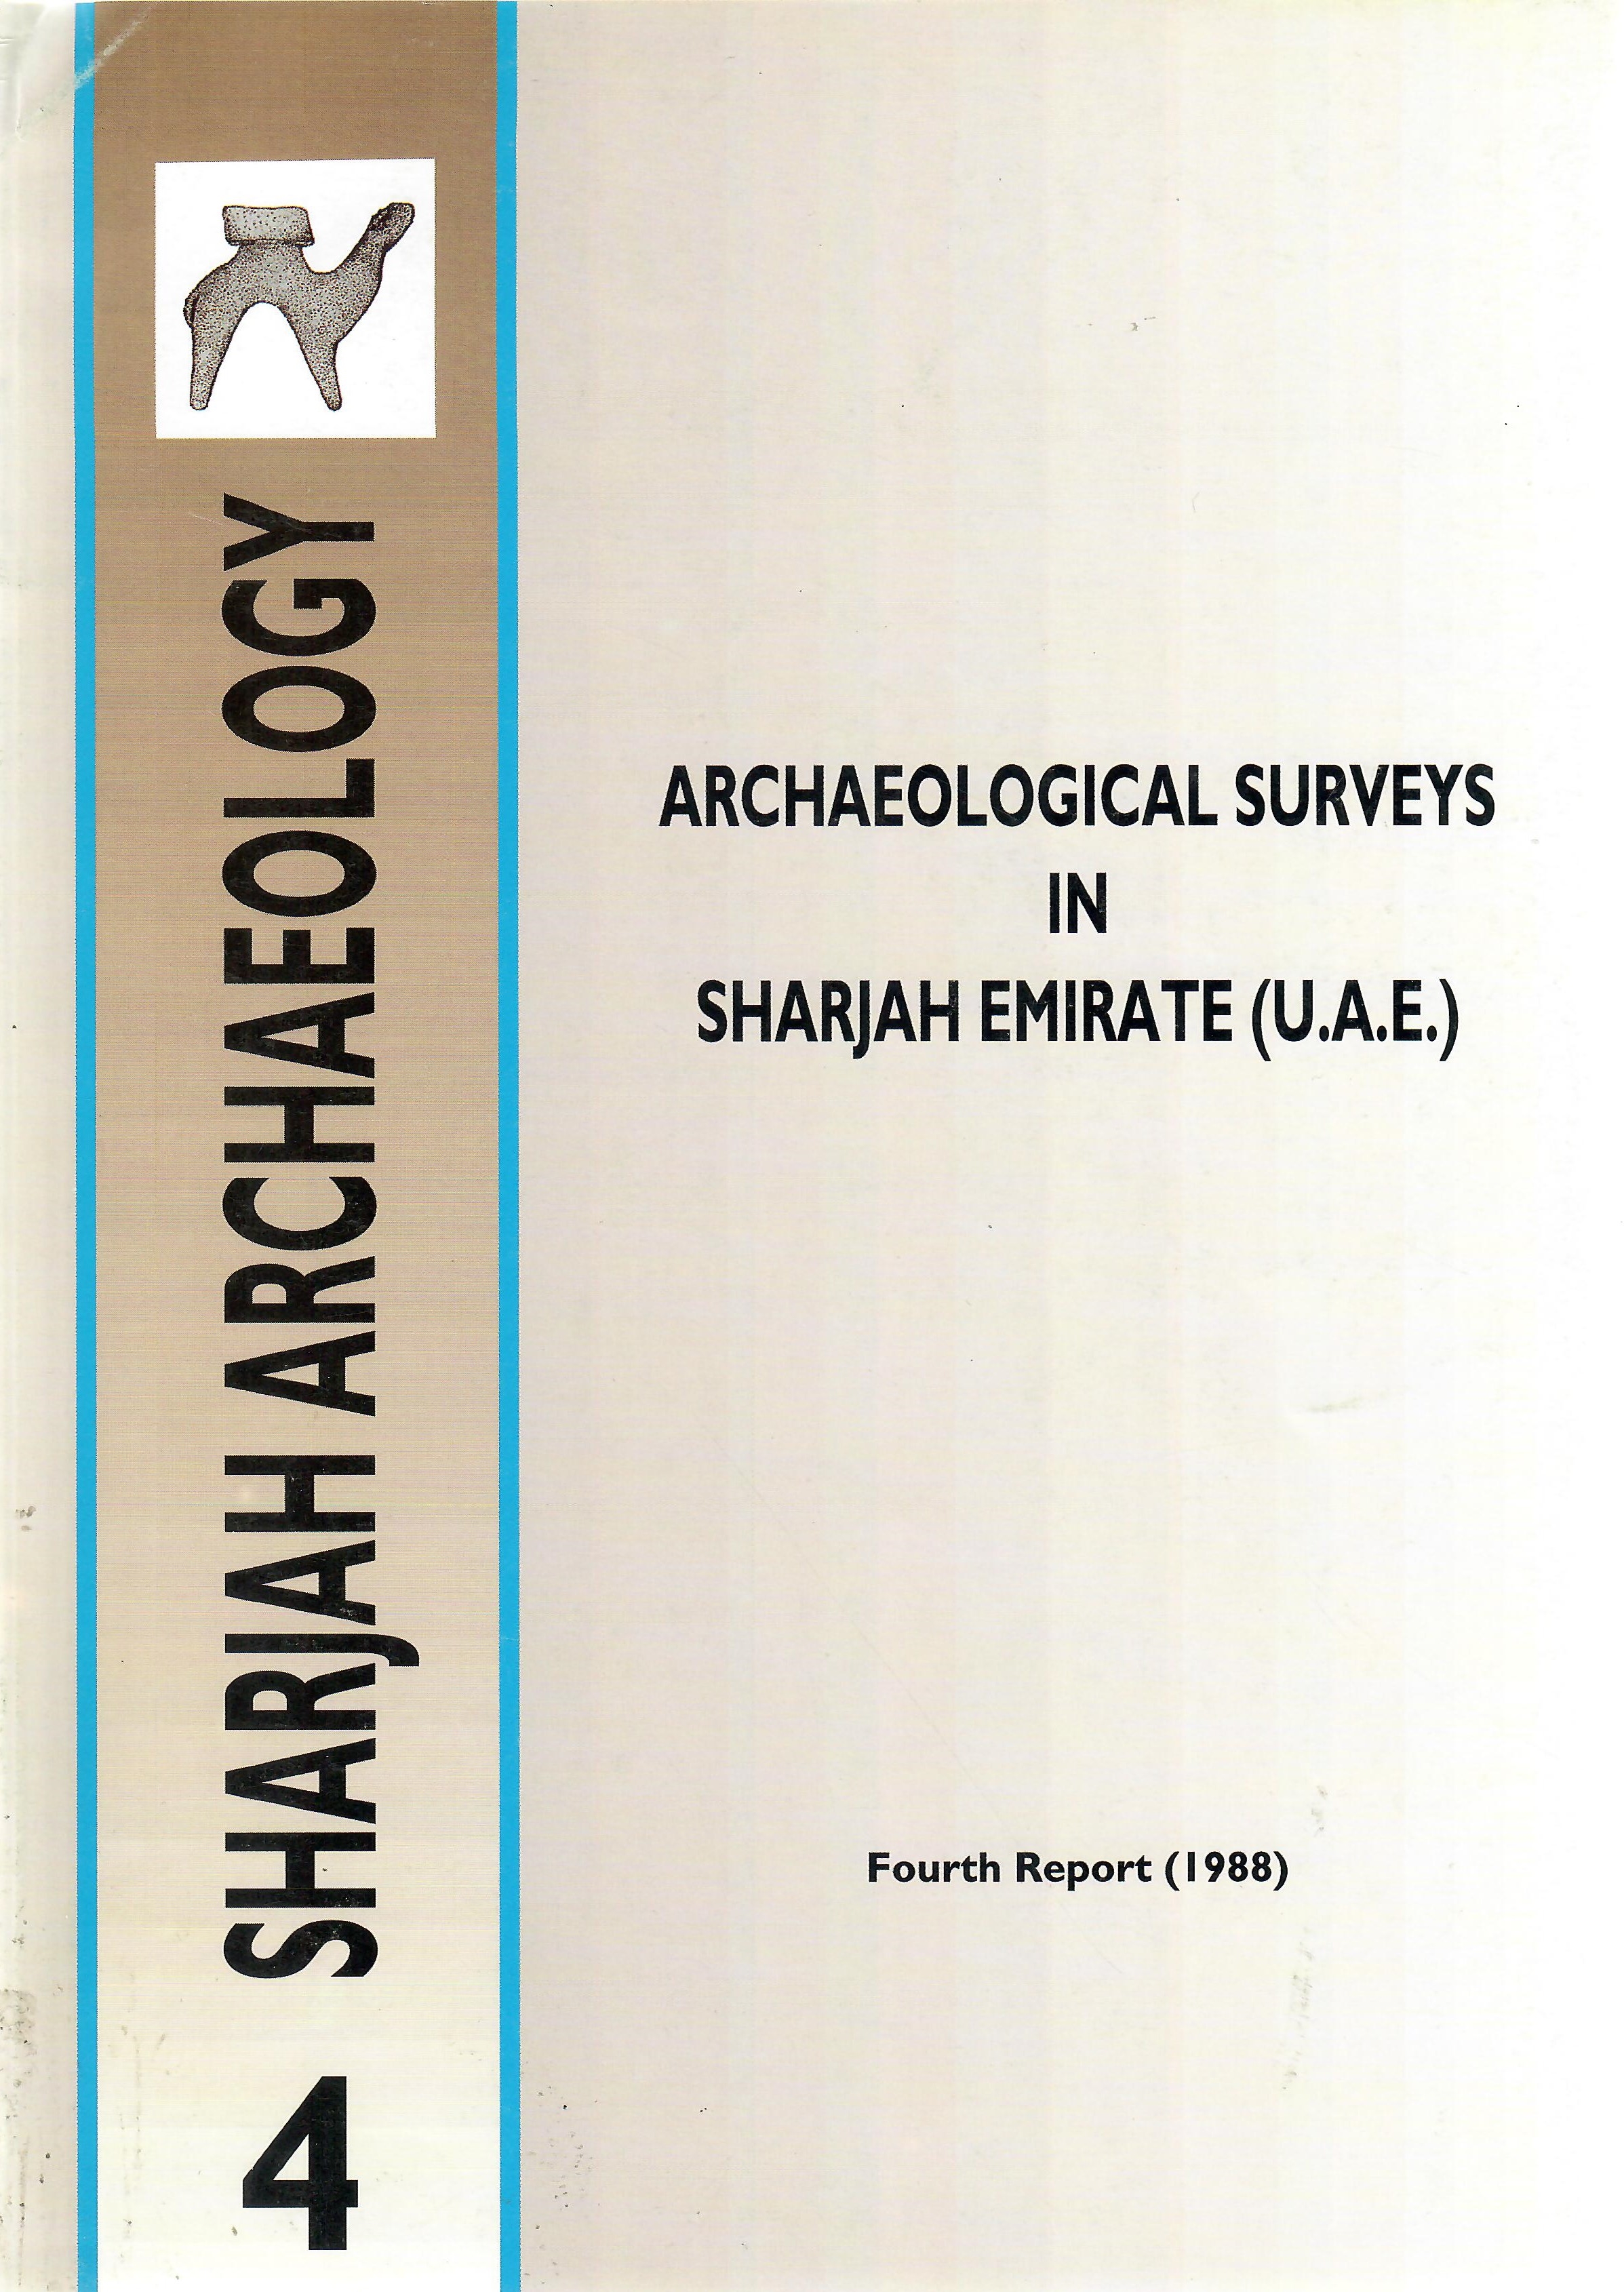 SHARJAH ARCHAEOLOGY FOURTH REPORT 1988